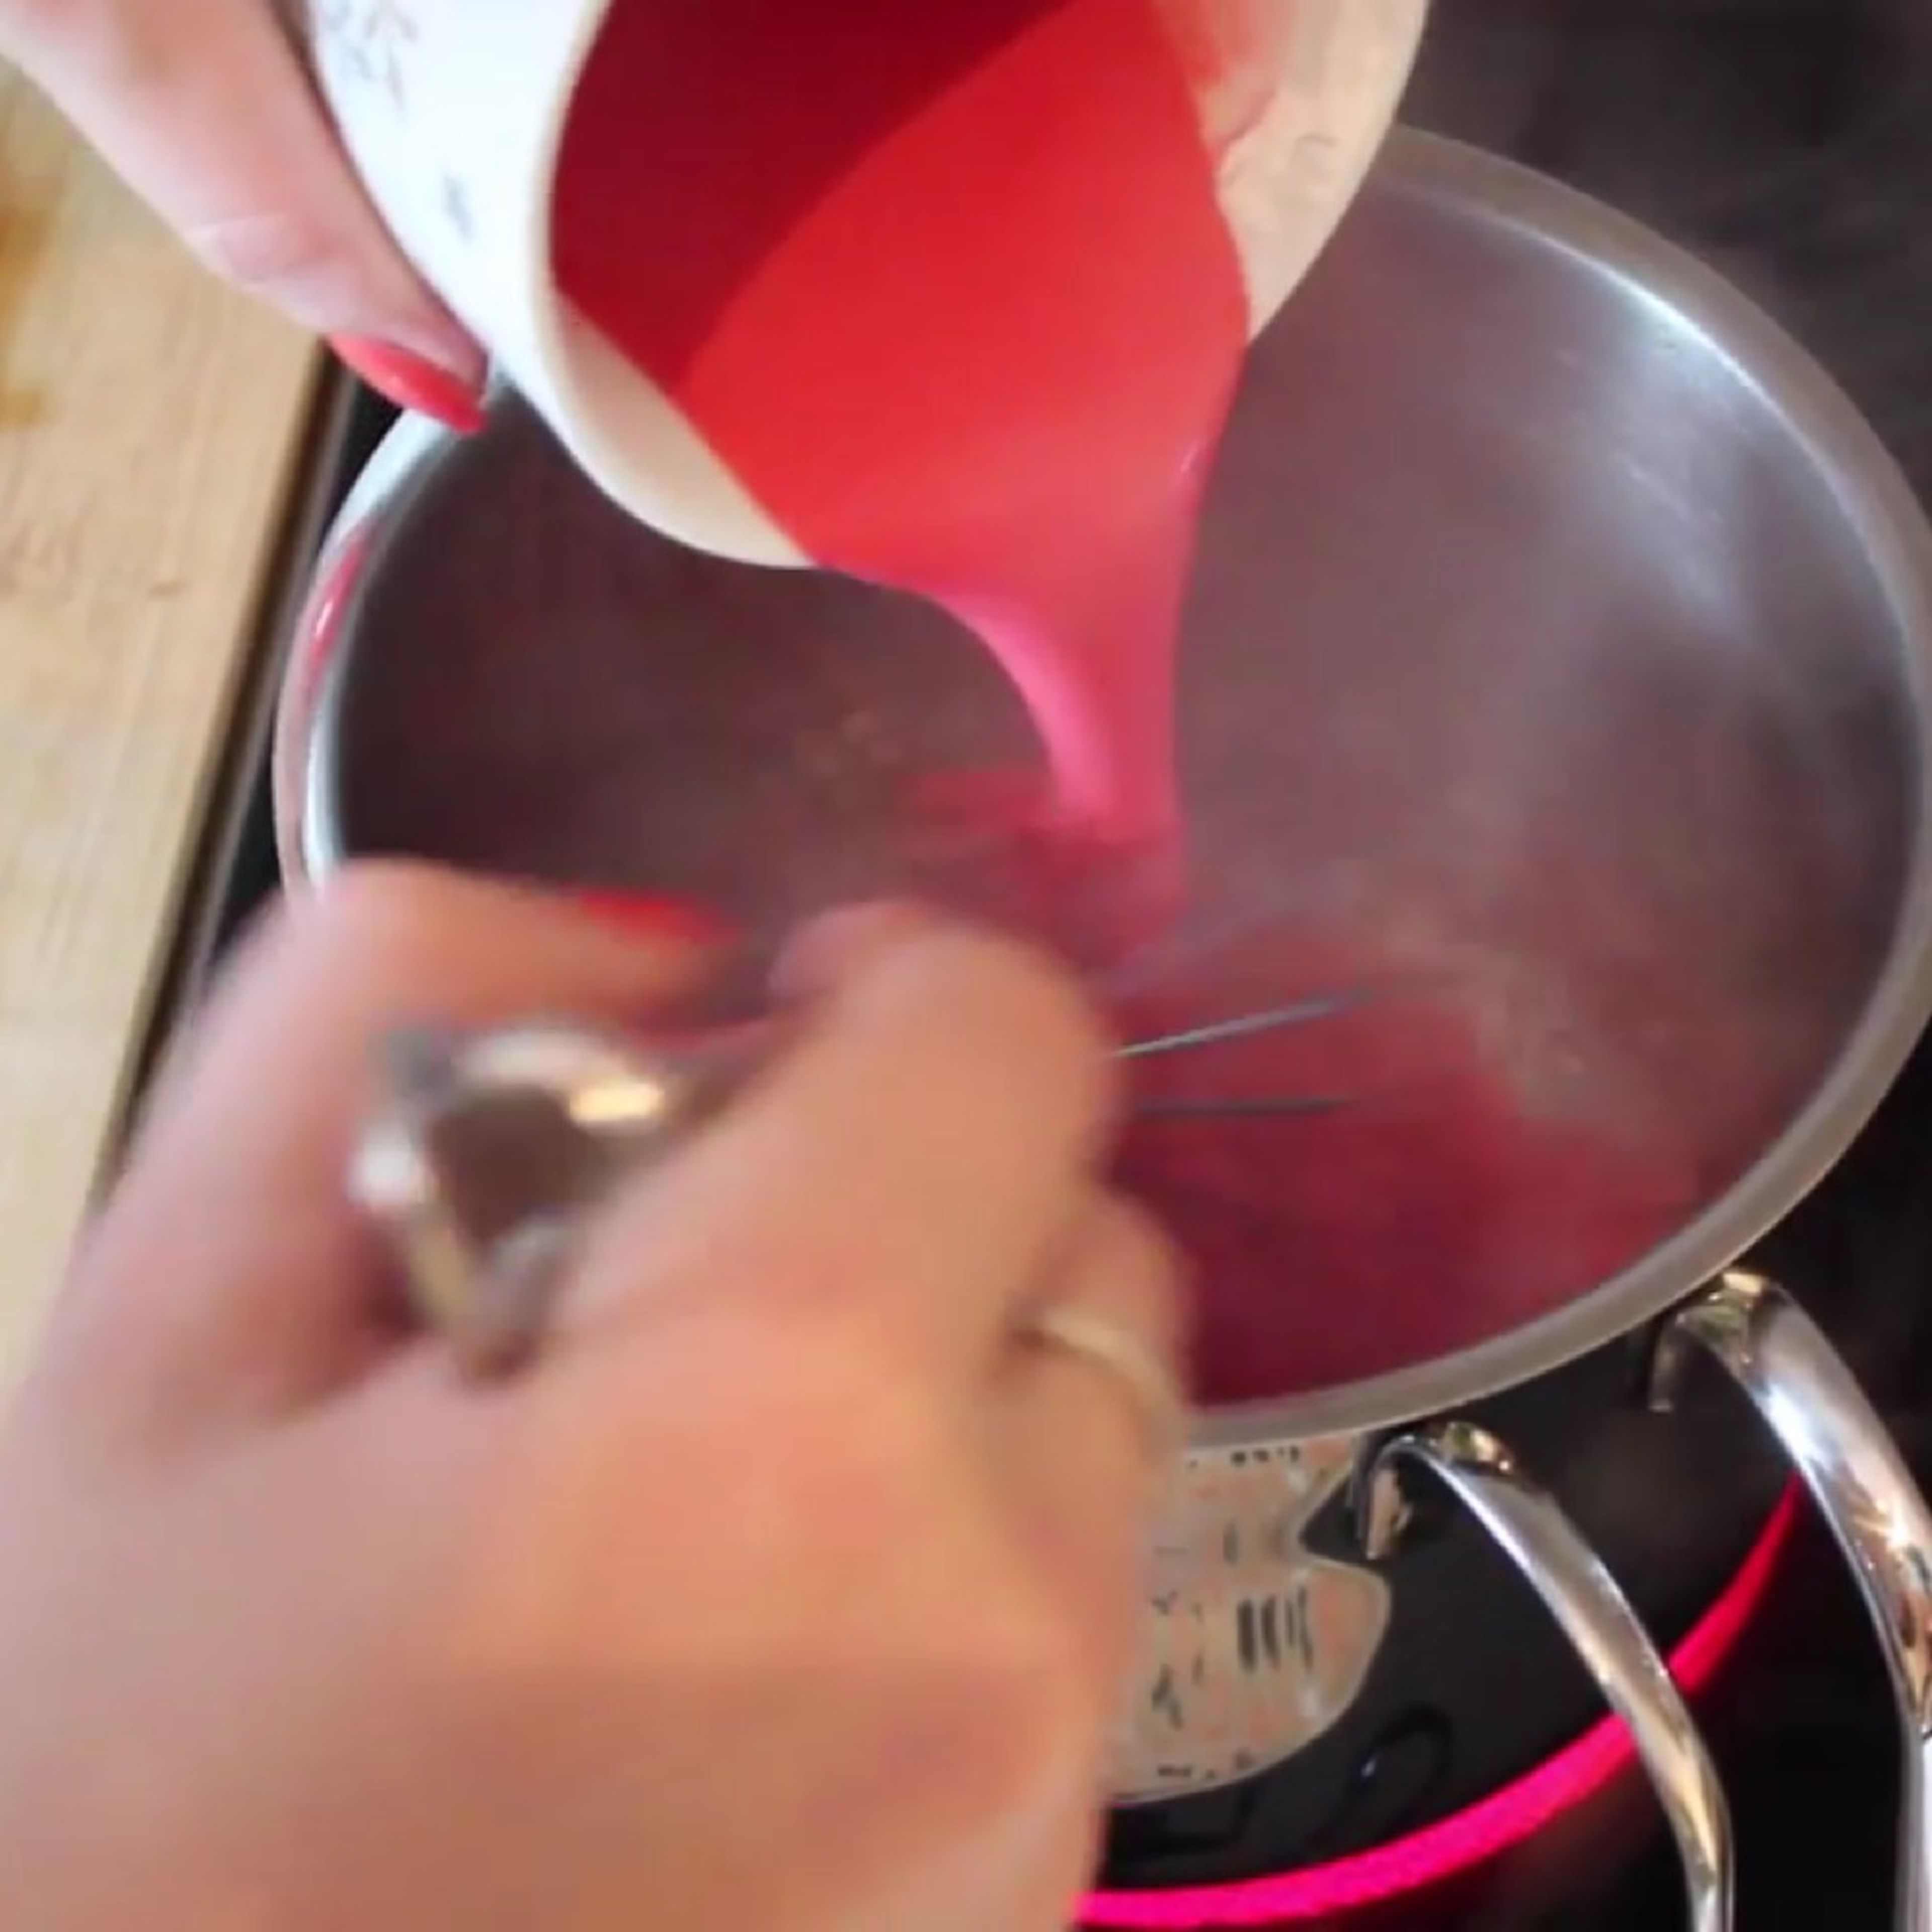 Bring the water to a boil. Pour the raspberry juice-custard mix into the boiling water and whisk vigorously. Take the pot off the heat. Add the thawed raspberries. Set aside to cool down.